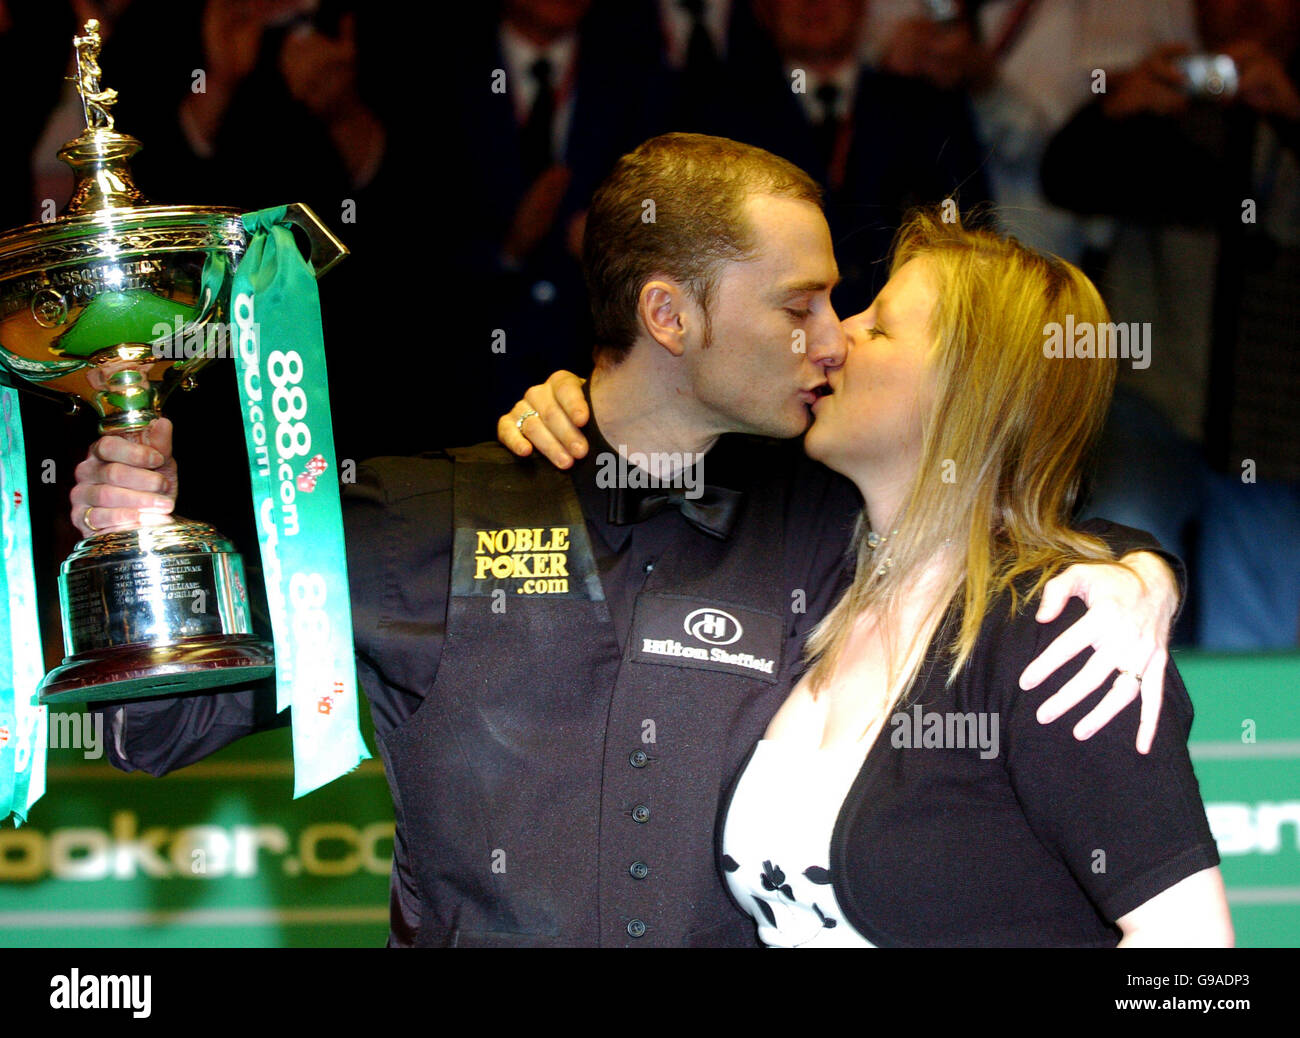 Snooker - 888.com World Snooker Championship 2006 - Final - The Crucible Theatre. Graeme Dott celebrates his victory with his wife Elaine Stock Photo